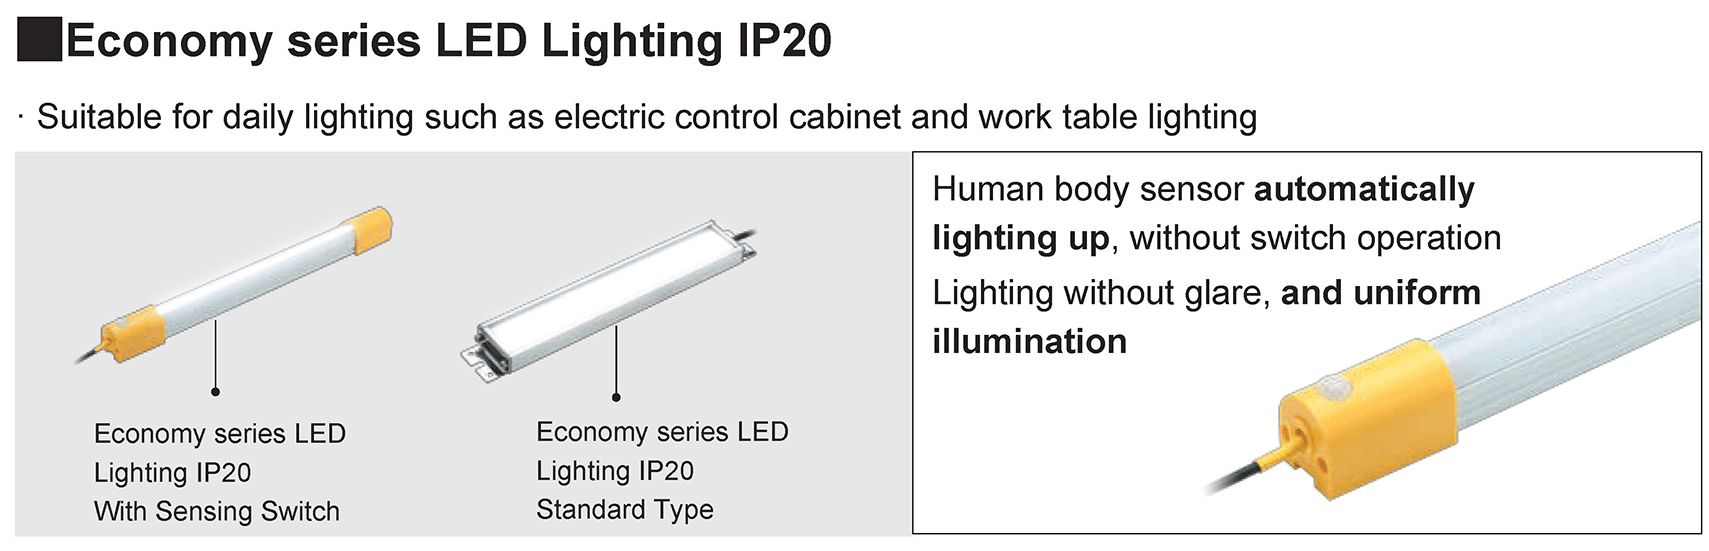 Economy Series LED With Sensing Switch